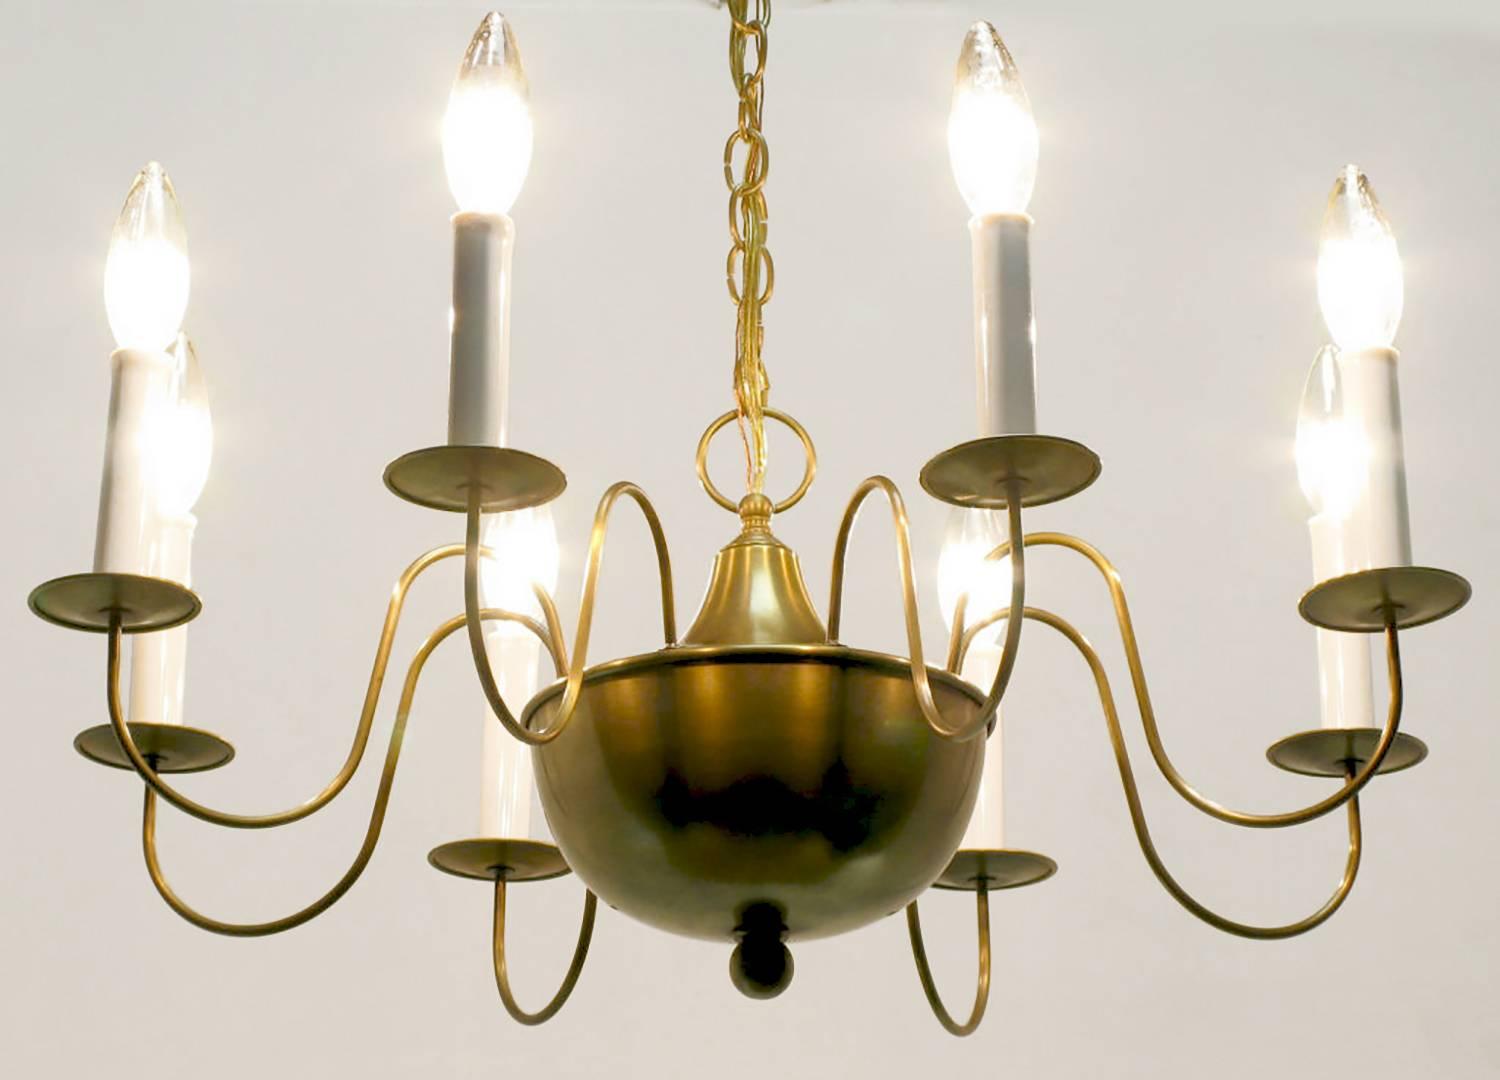 Fine Hand-Spun Brass Eight-Light Chandelier with Delicate Arms For Sale 1